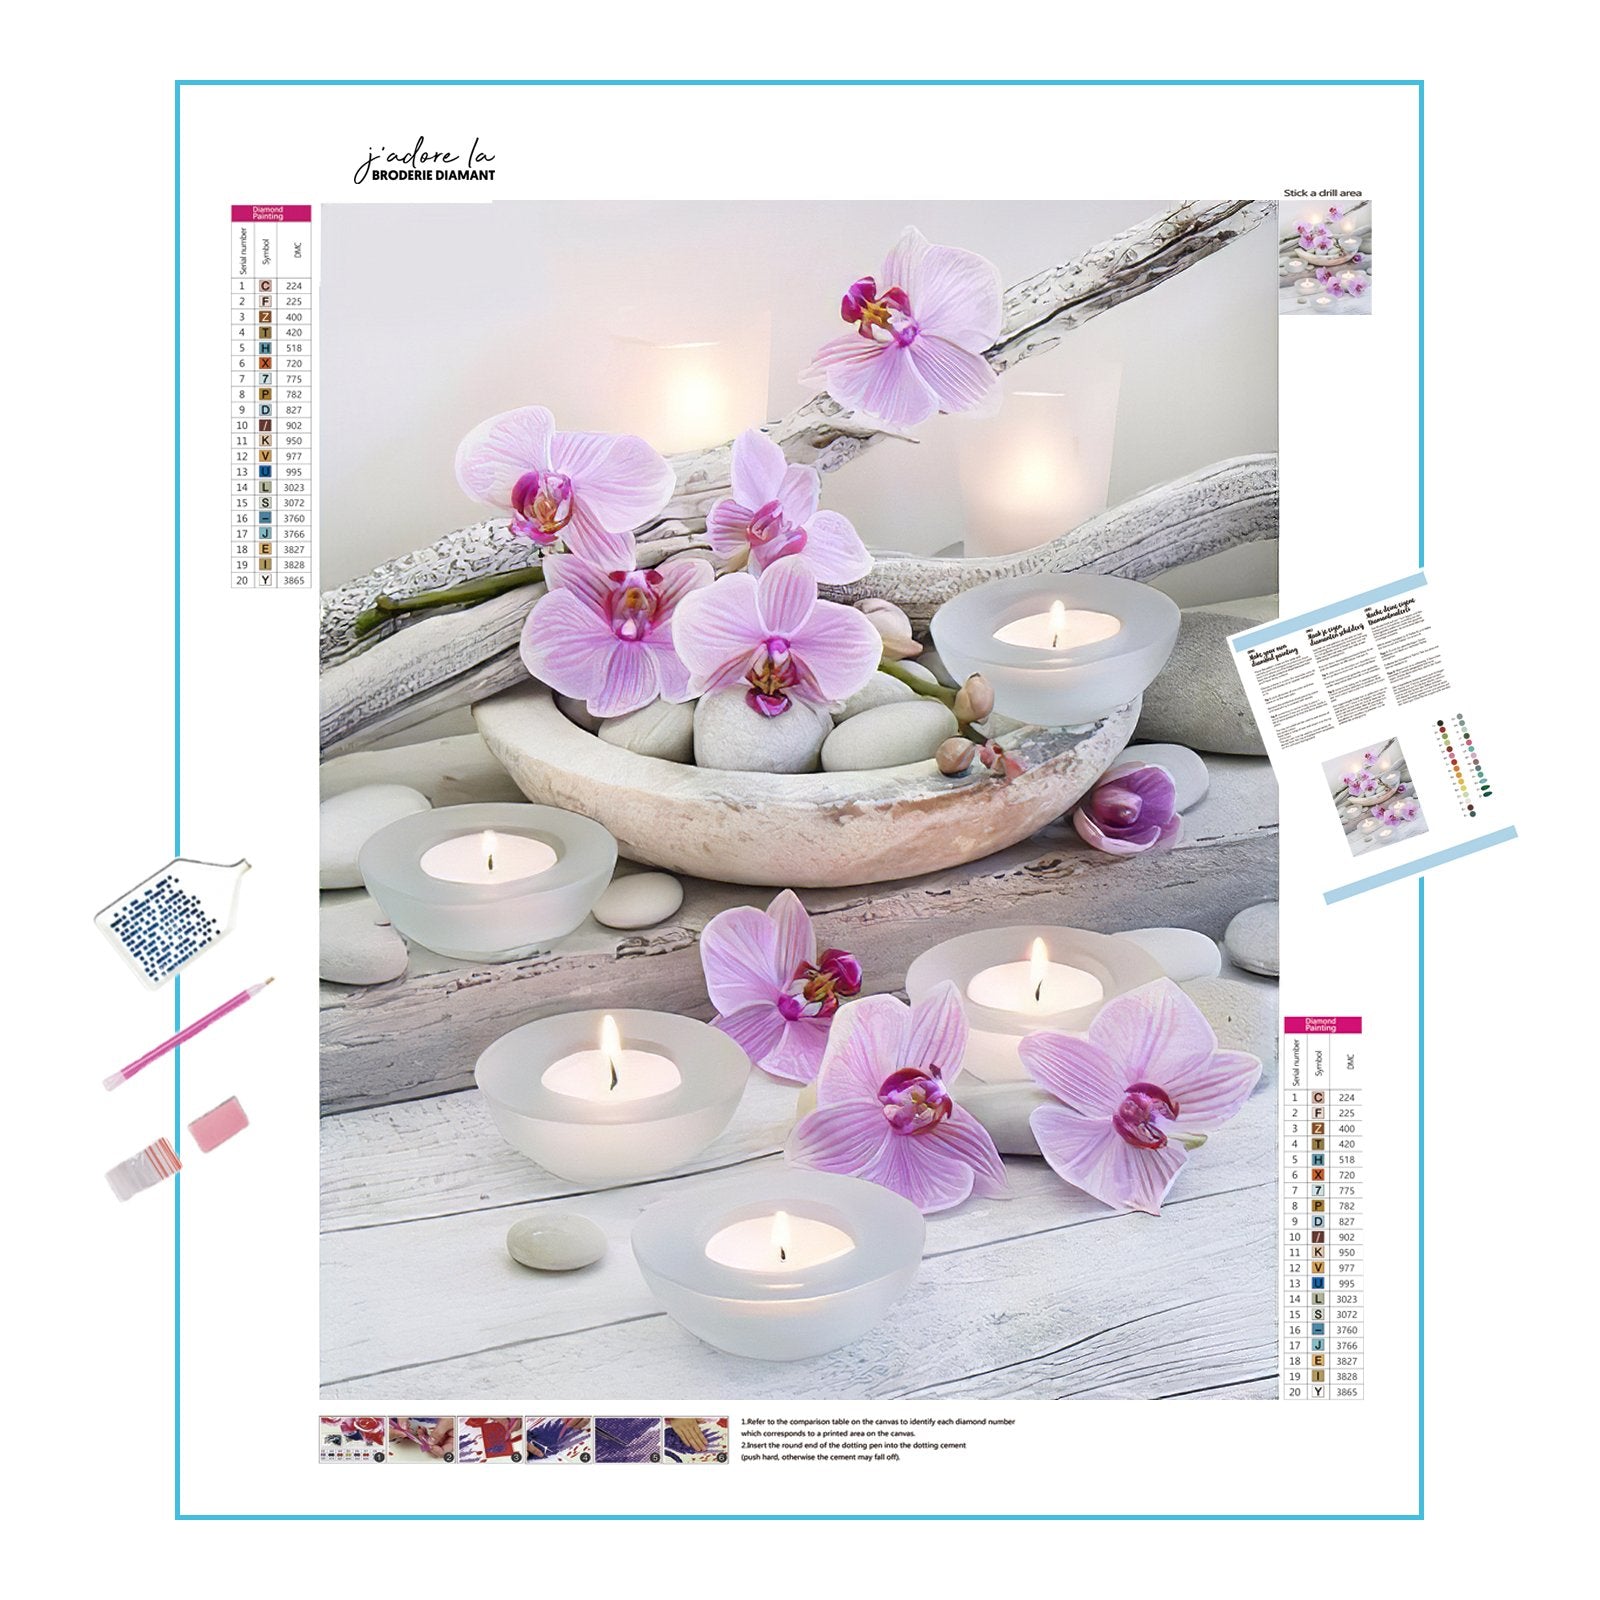 Ambiance Zen and Candle: Serenity and peace in every piece Ambiance Zen And Candle - Diamondartlove